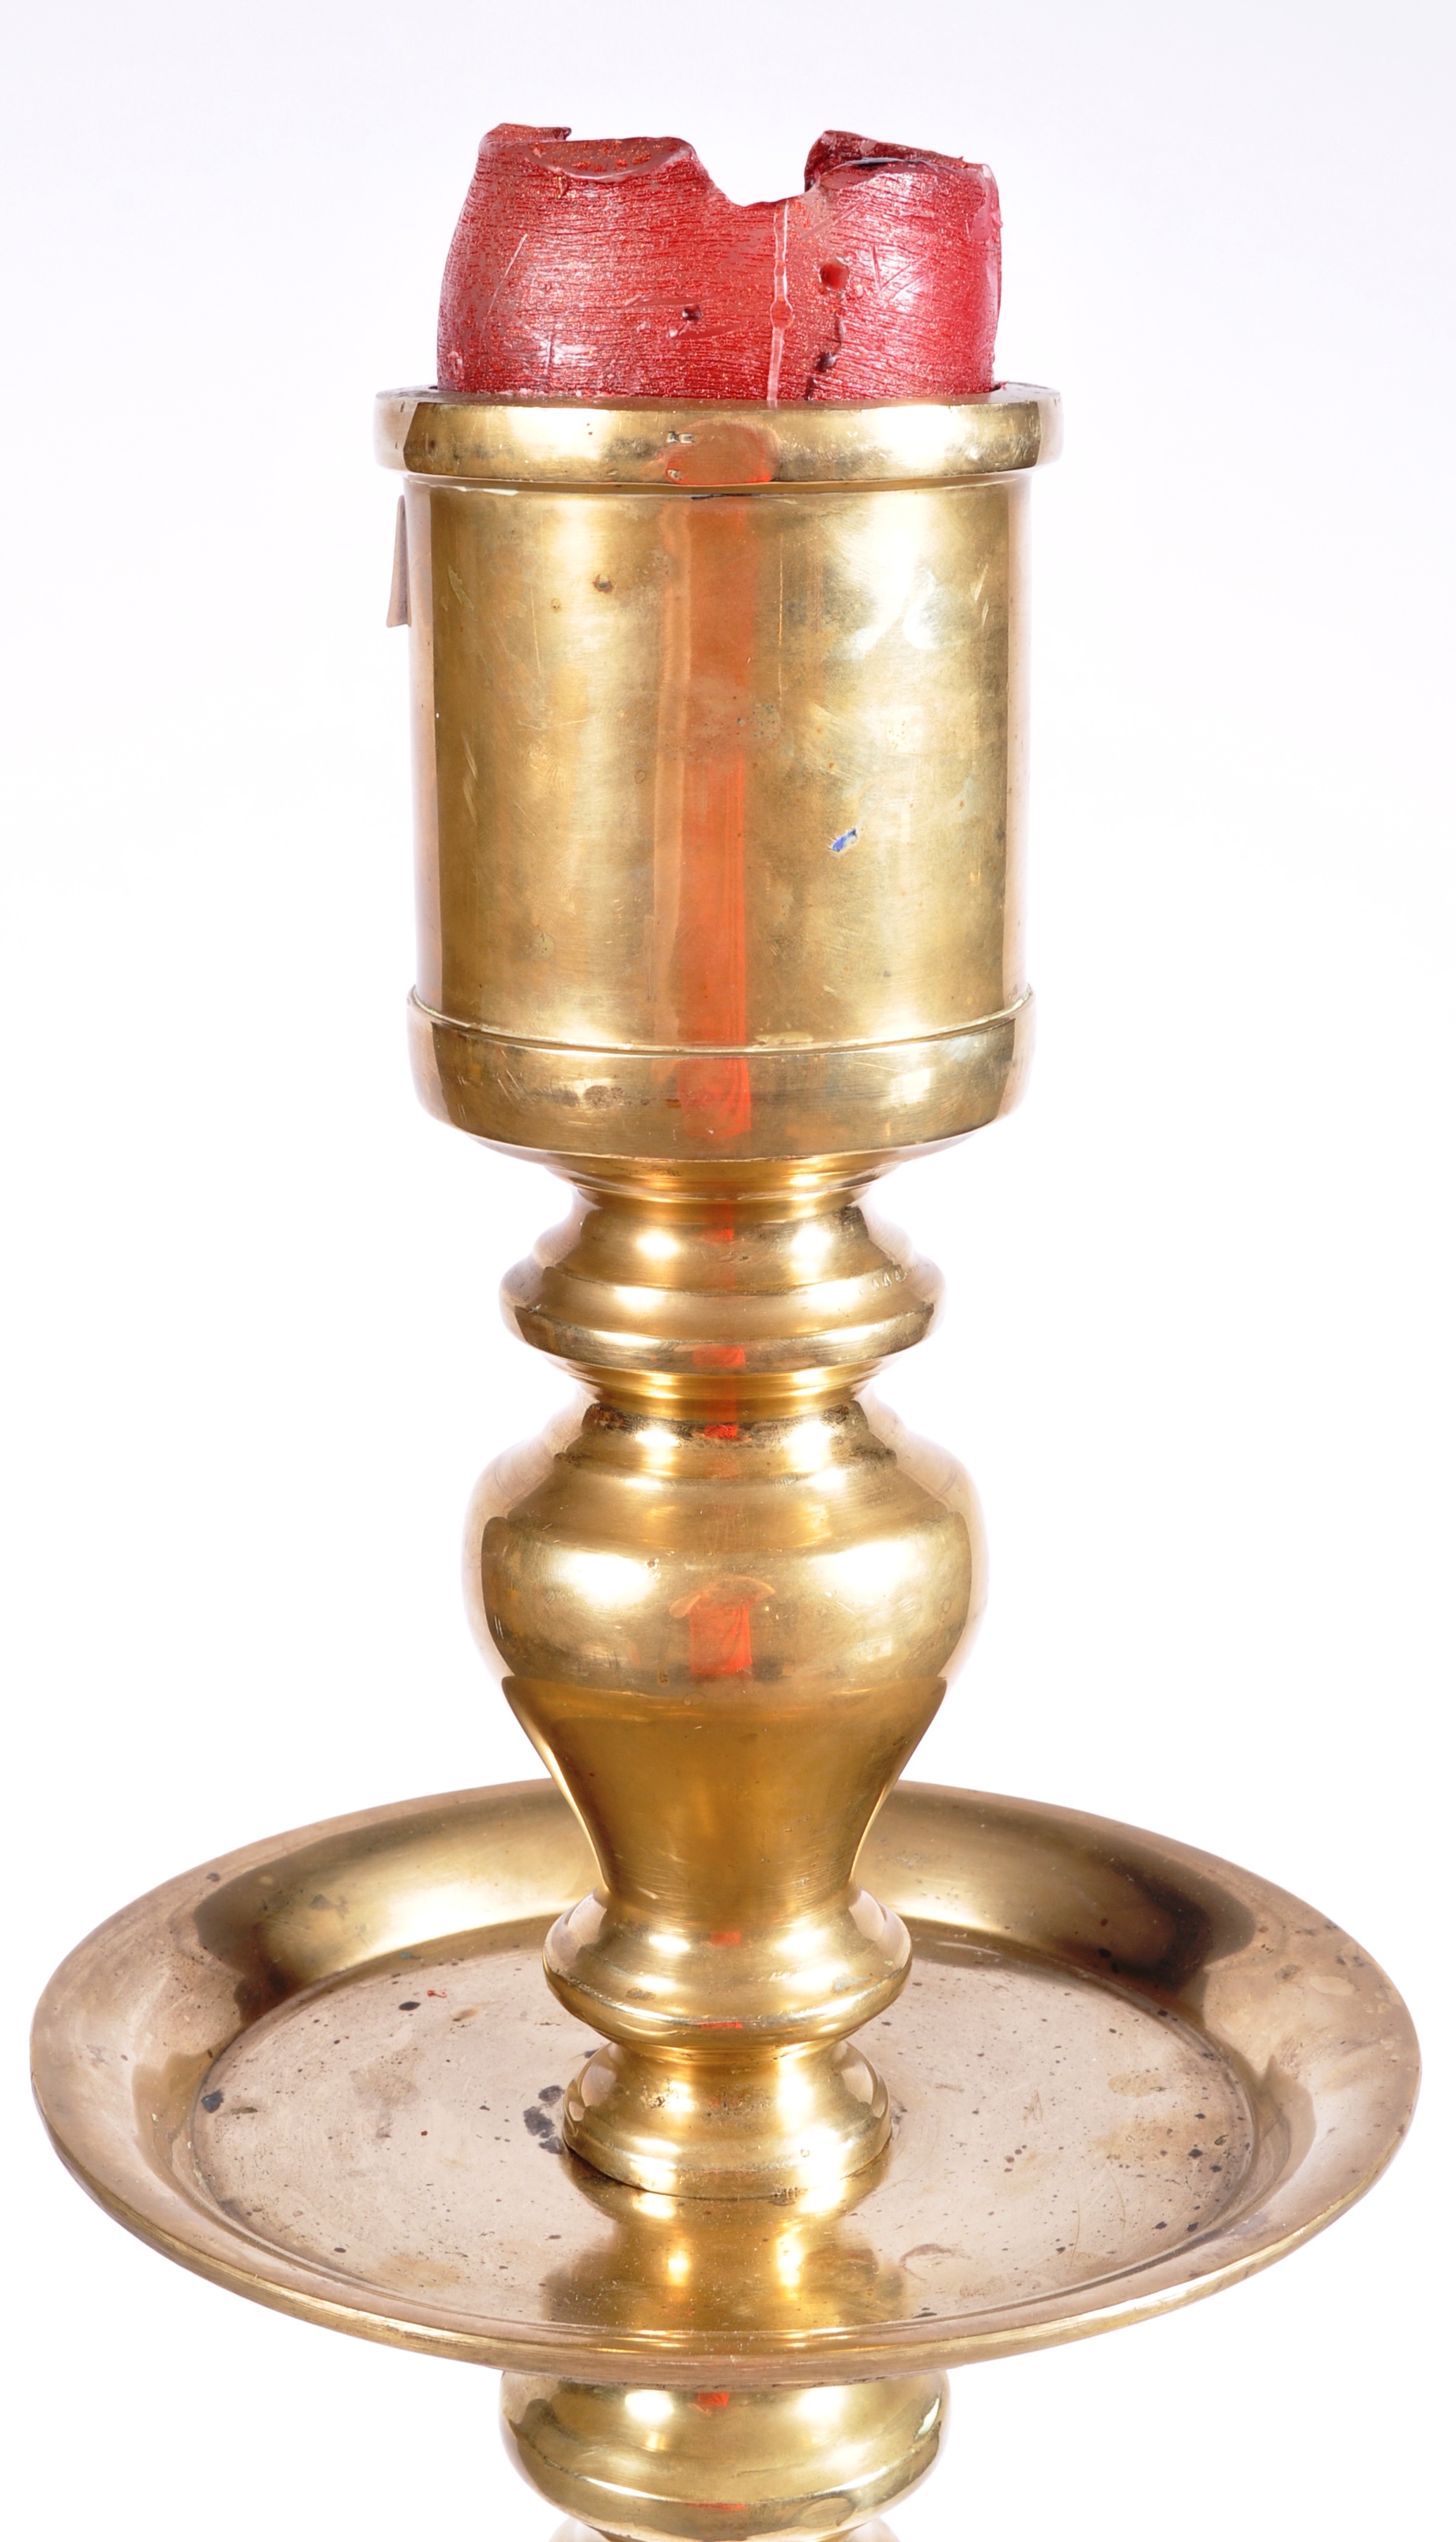 LARGE HEAVY FLOOR STANDING DUTCH CANDLESTICK - Image 2 of 6